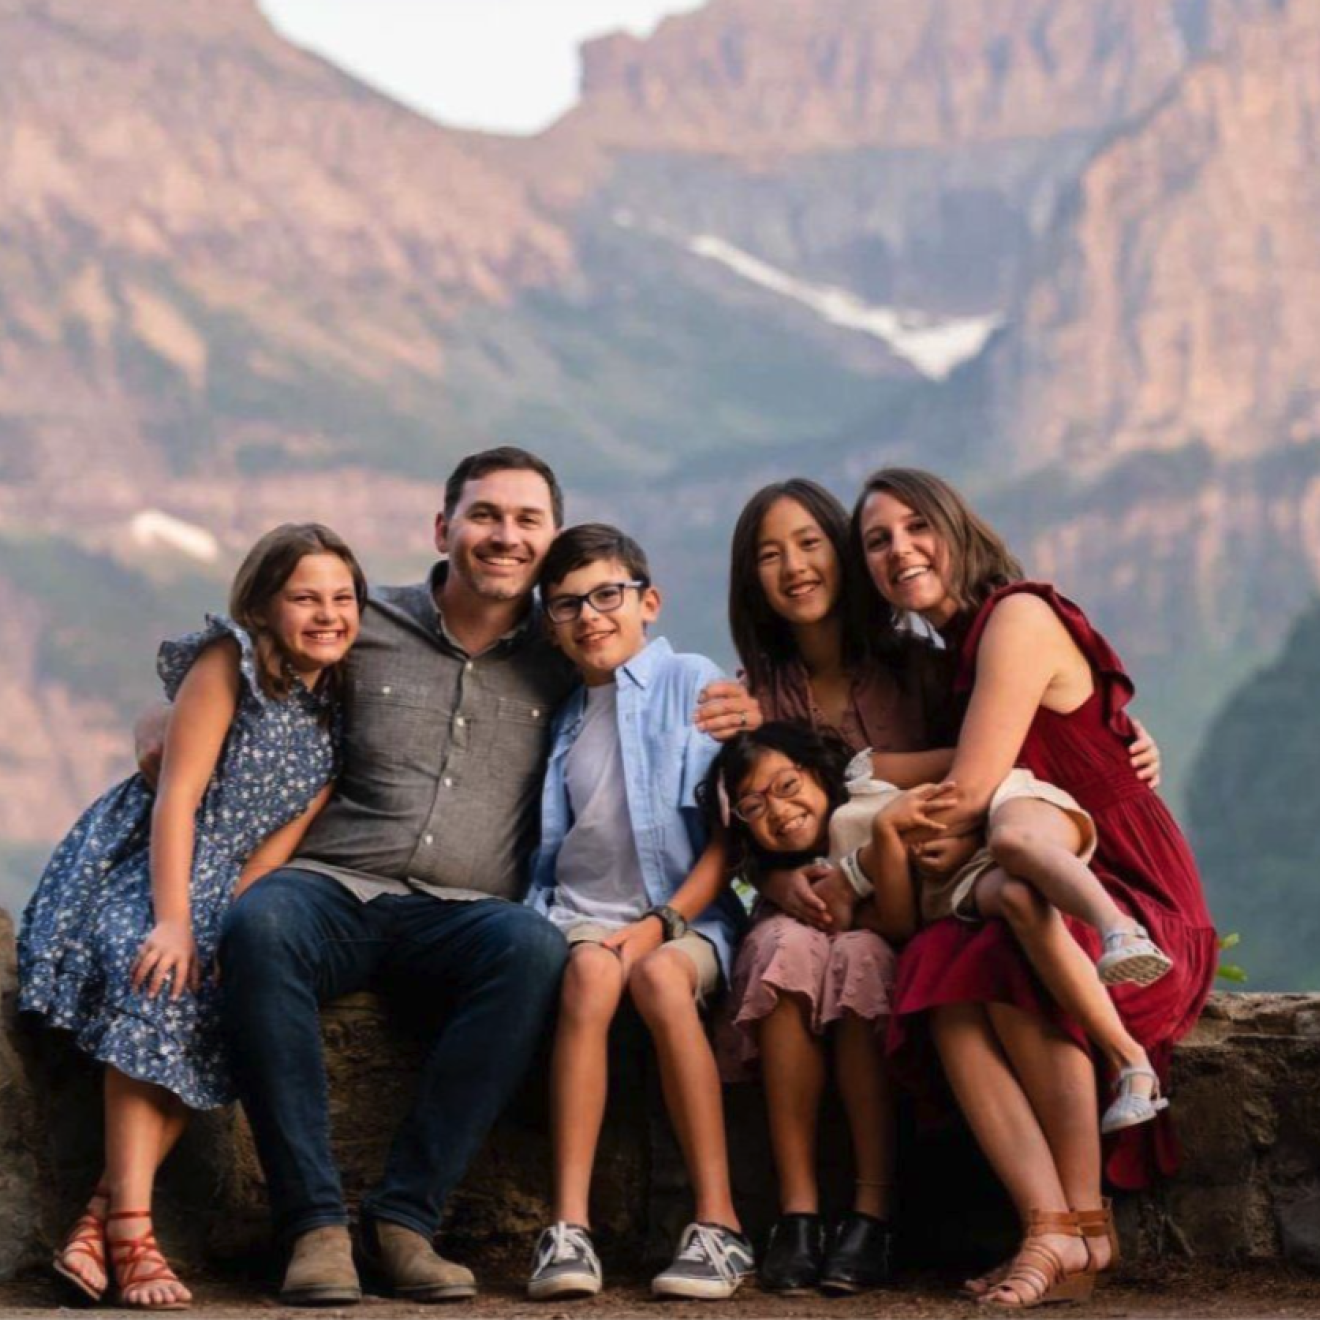 The Finlayson family, a man, woman and 4 kids, poses for a photograph in front of a mountain landscape.